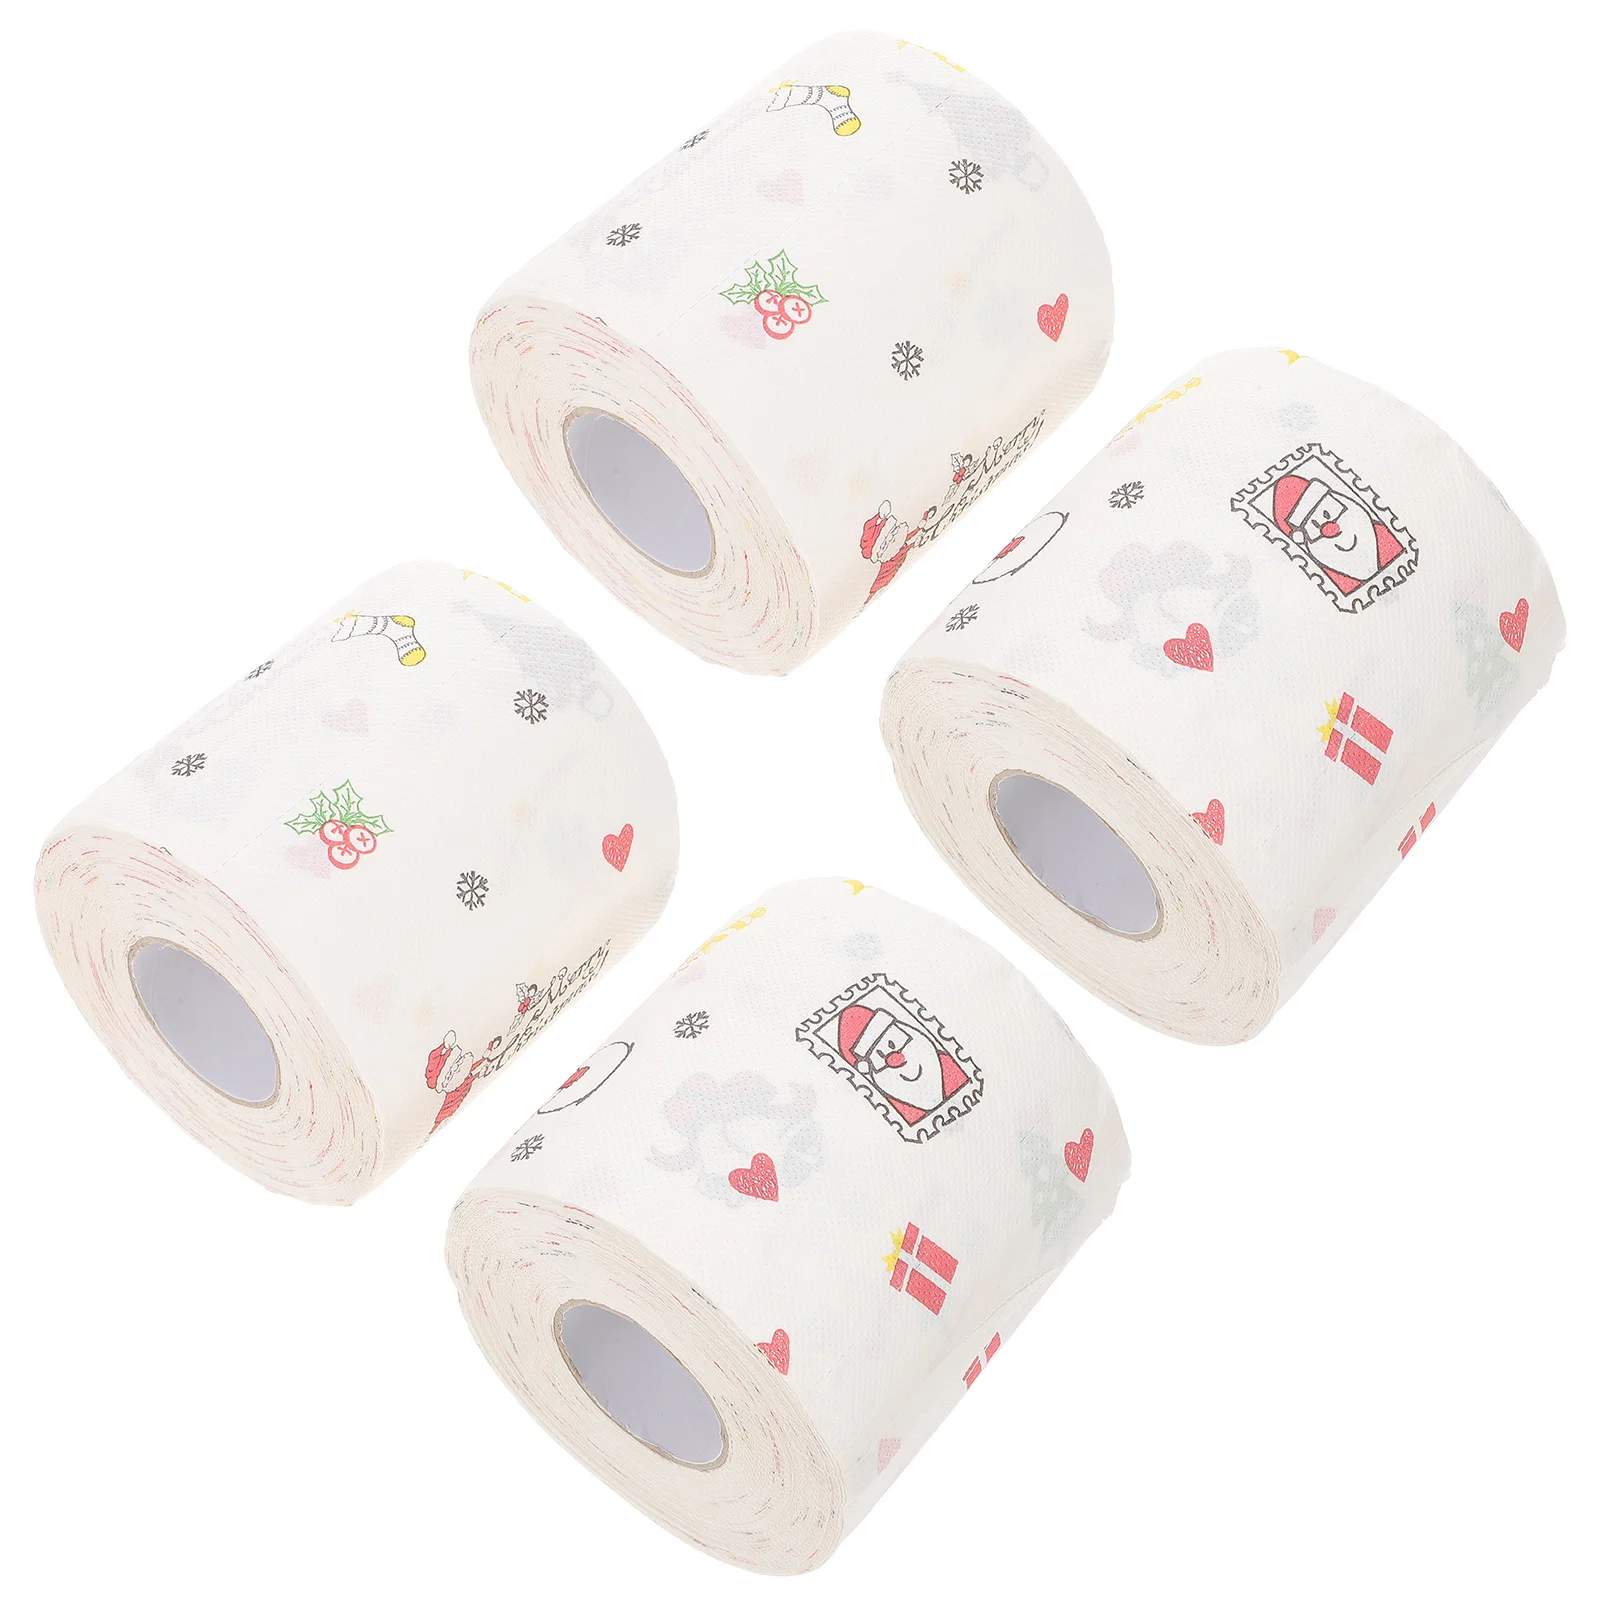 

Paper Toilet Christmas Tissue Funny Napkin Rolls Roll Merry Holidayparty Decoration Santa Kitchen Tissues Printed Prints Claus